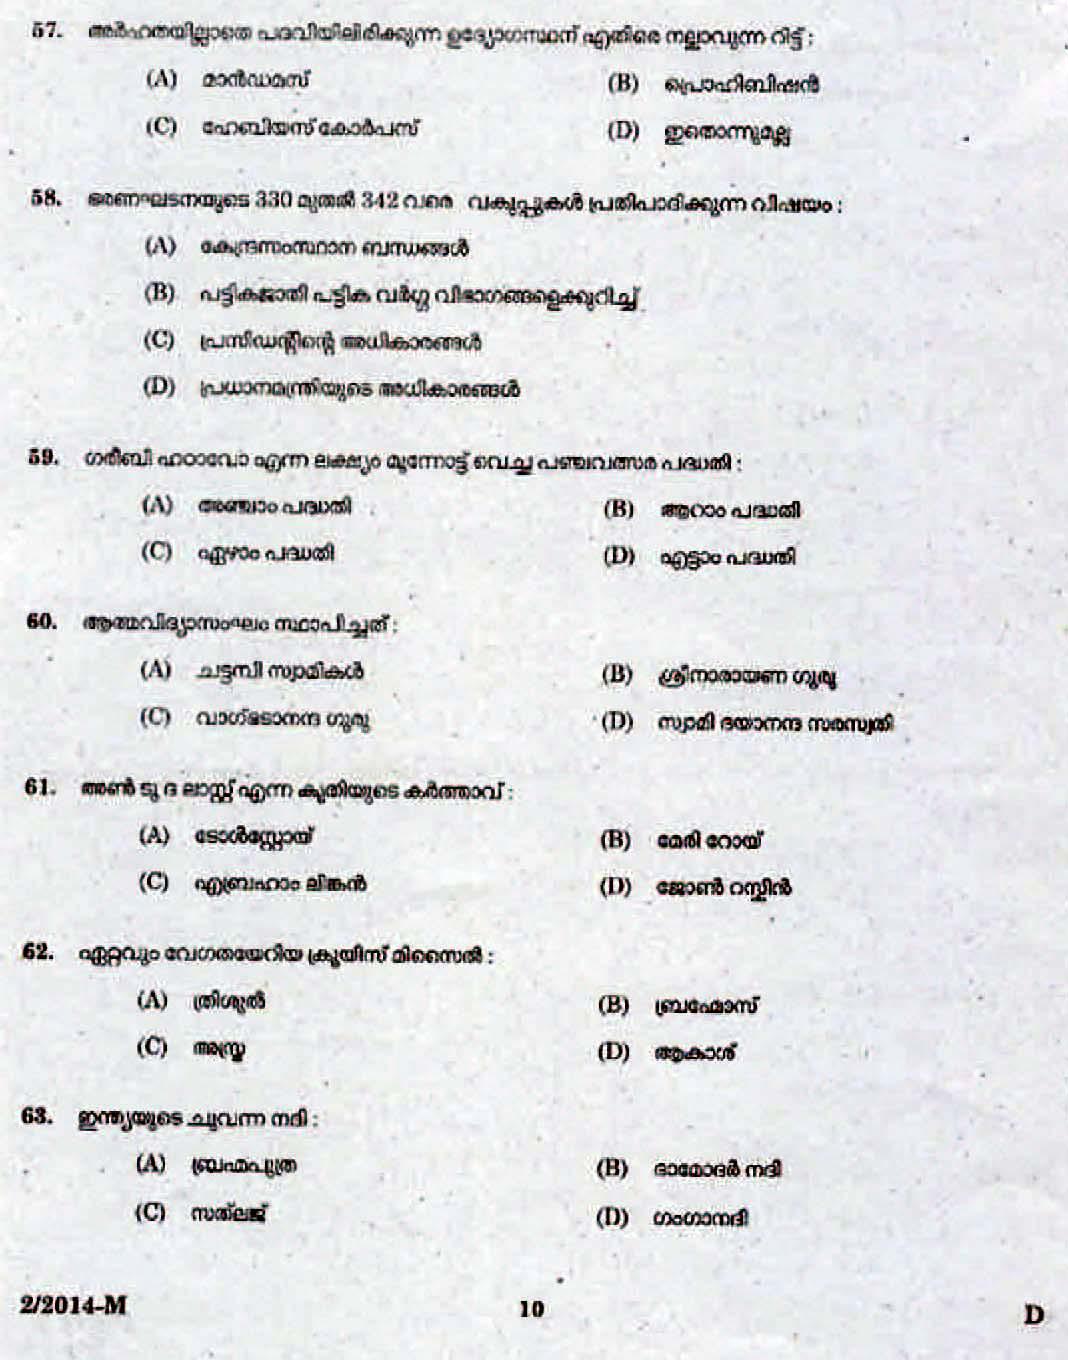 LD Clerk Question Paper Malayalam 2014 Paper Code 022014 M 7